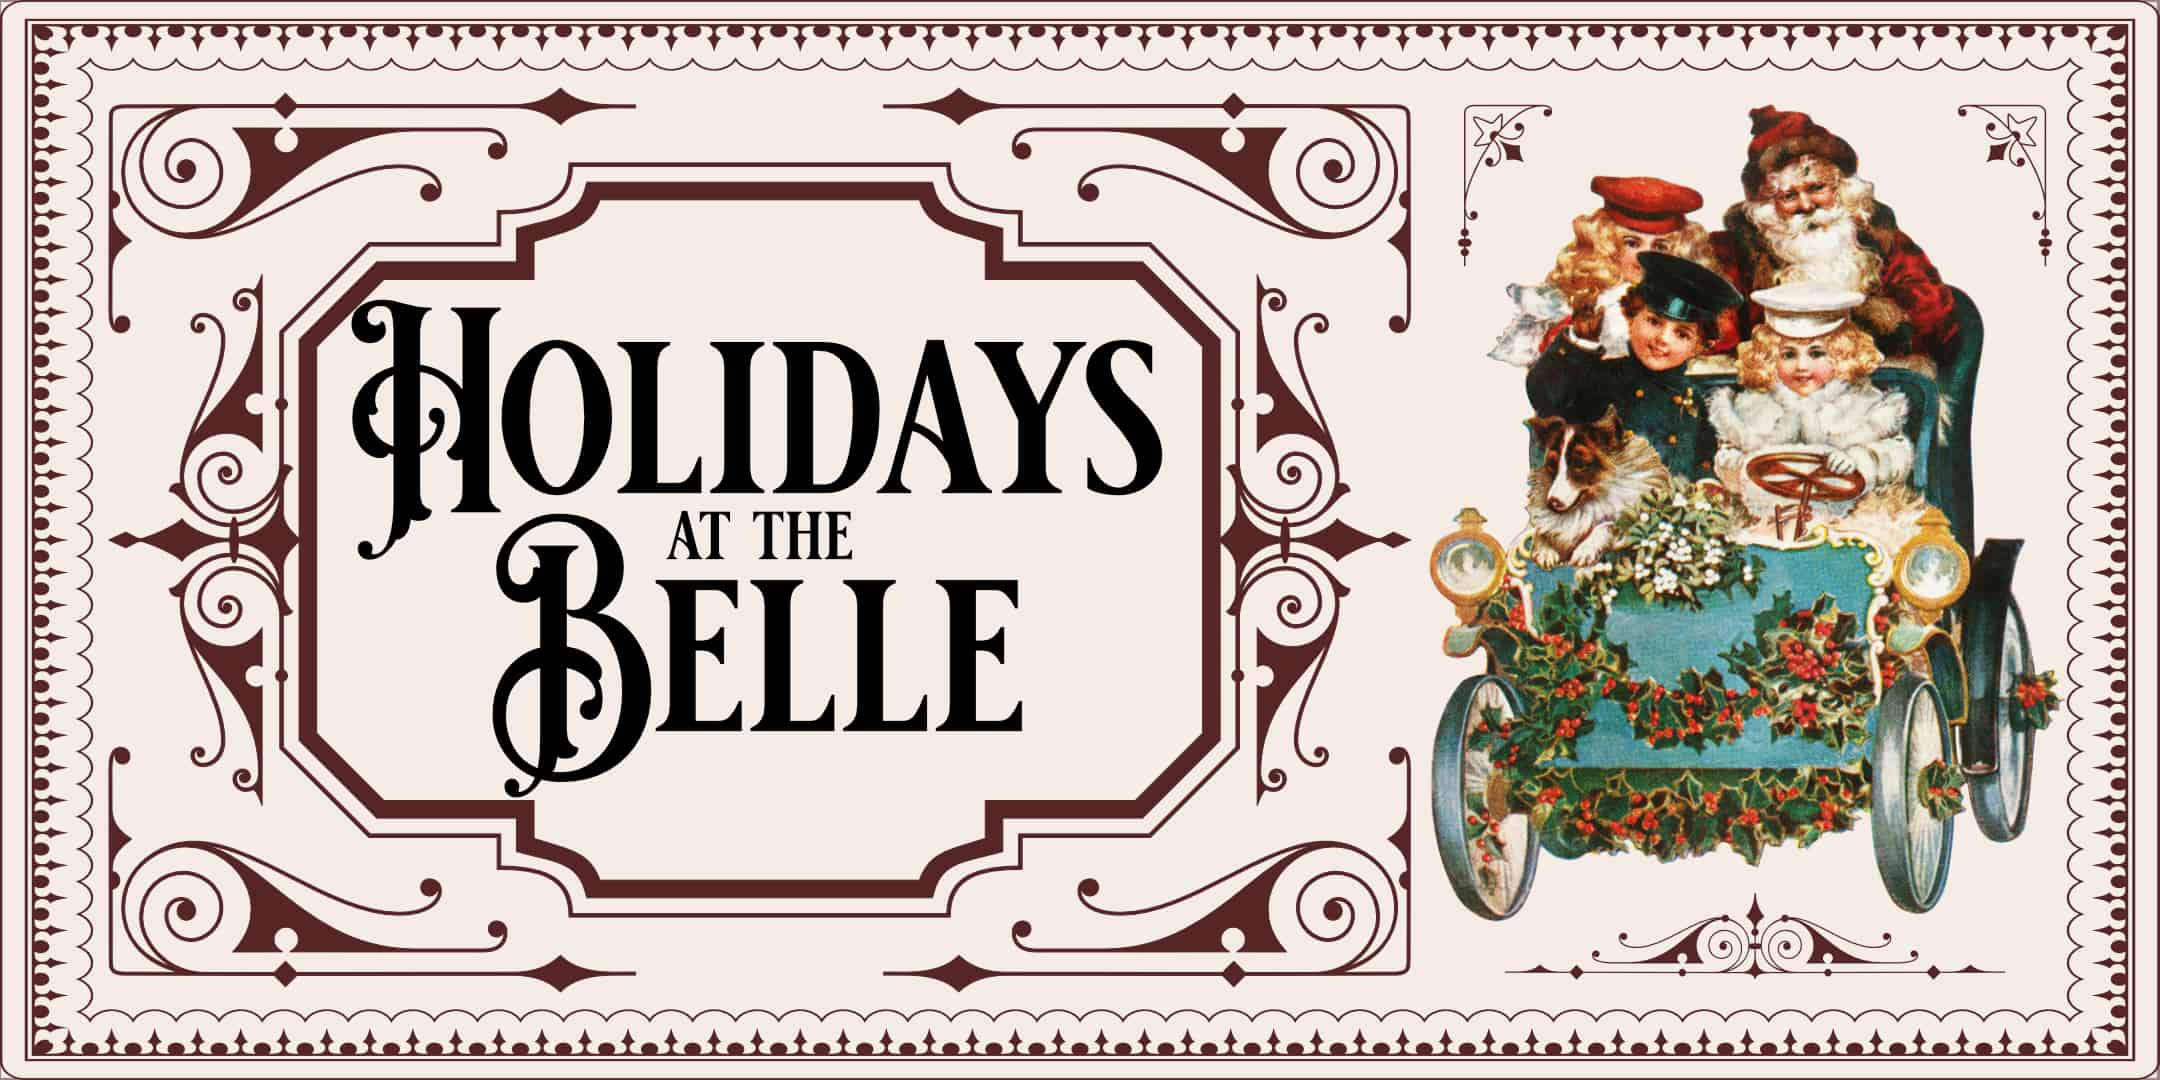 Holidays at The Belle banner with a vintage illustration of Santa and children riding in a holly-decked car